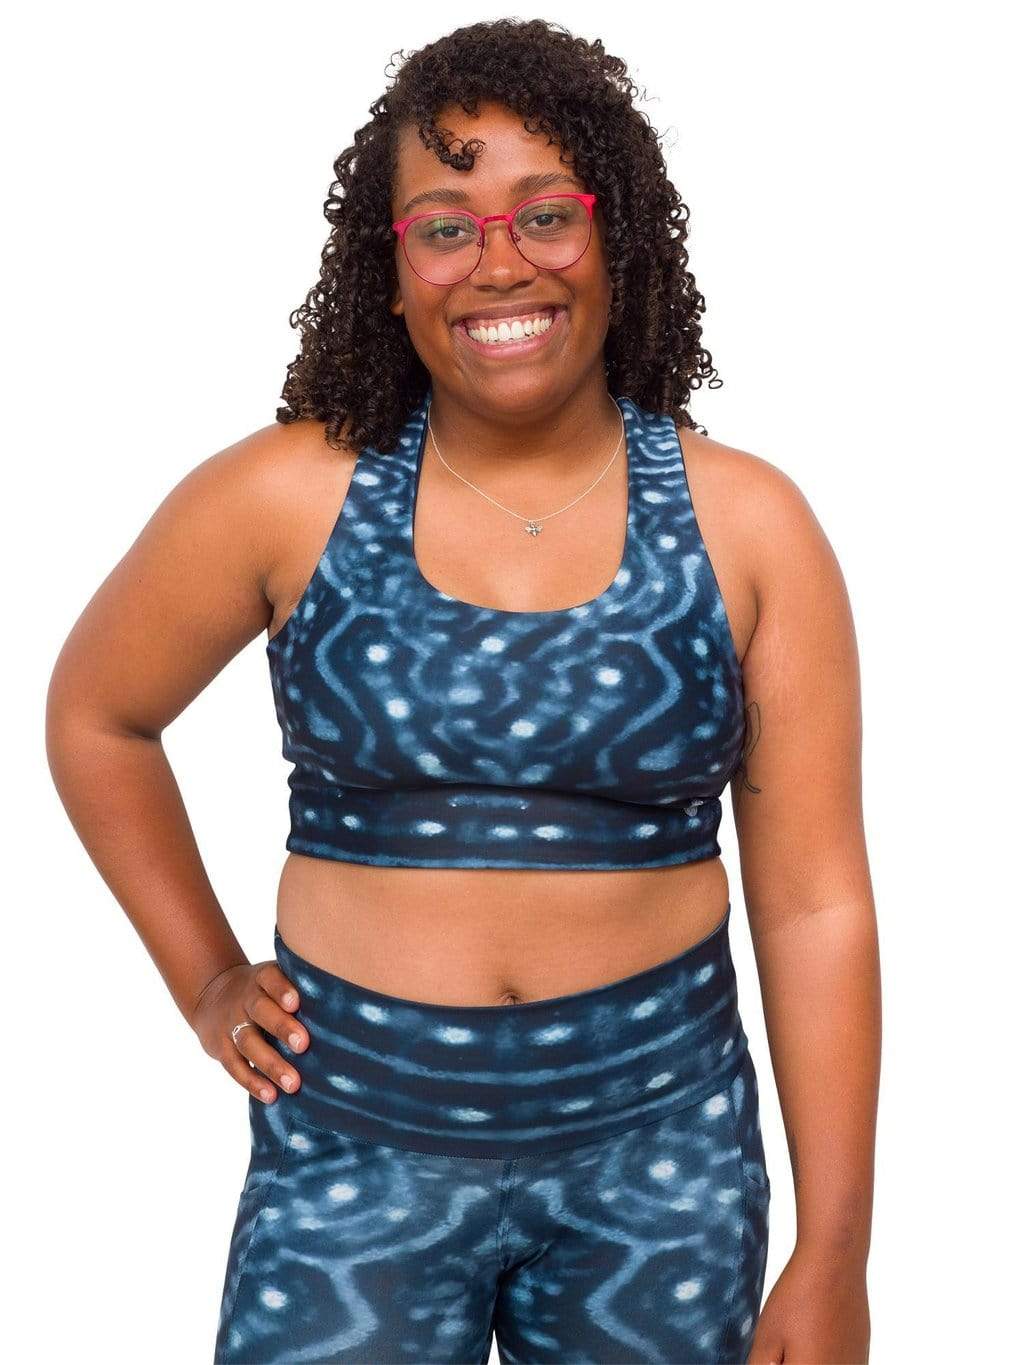 Model: Amani is the CFO of Minorities in Shark Sciences and a shark scientist. She is 5'3", 160 lbs, 36C and is wearing a M legging and L top.